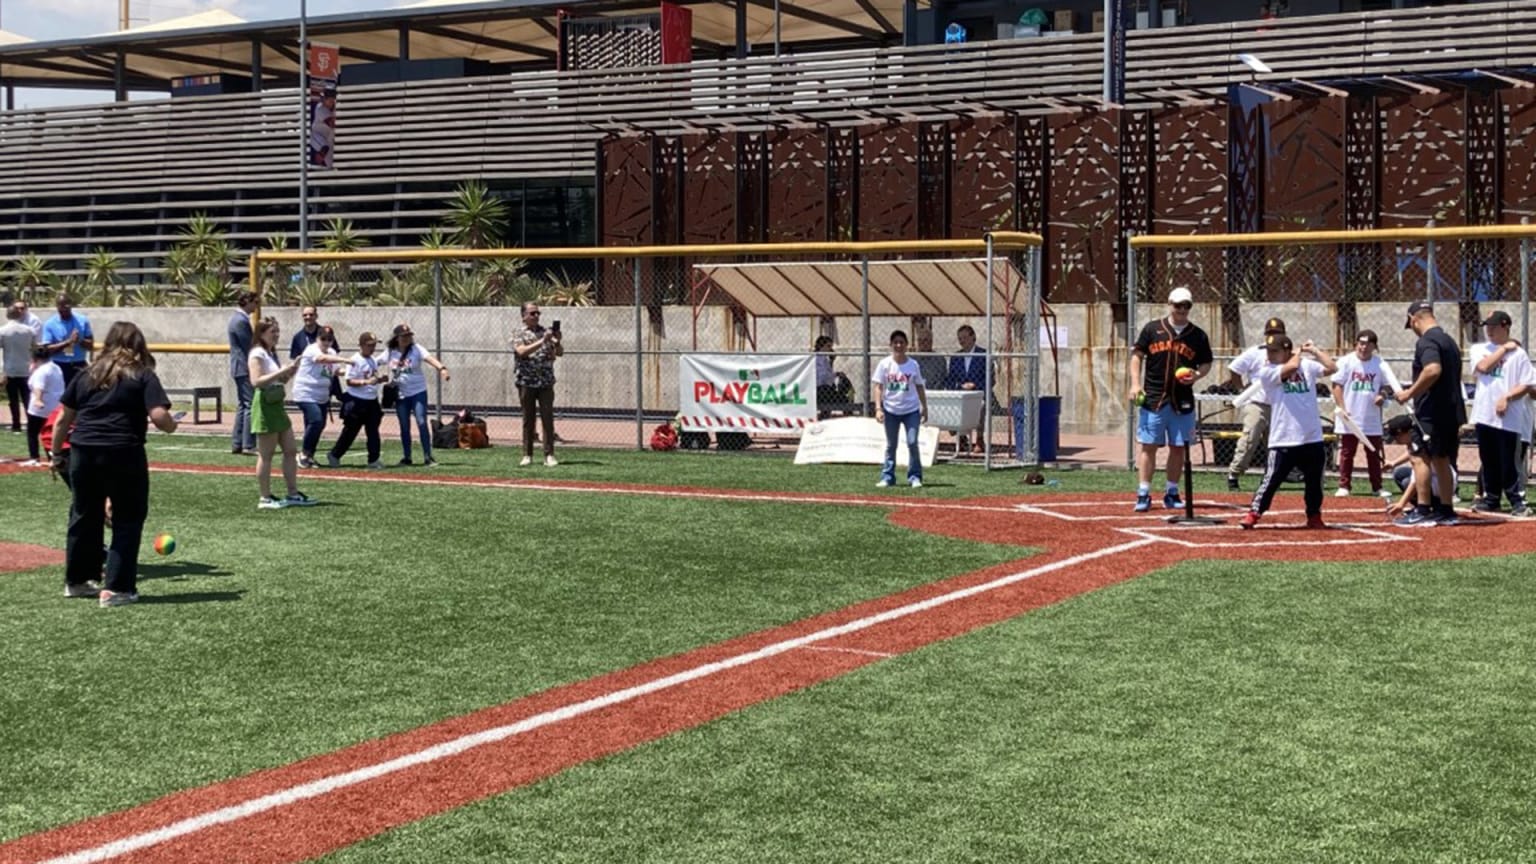 A Giants player stands near home plate while a child bats